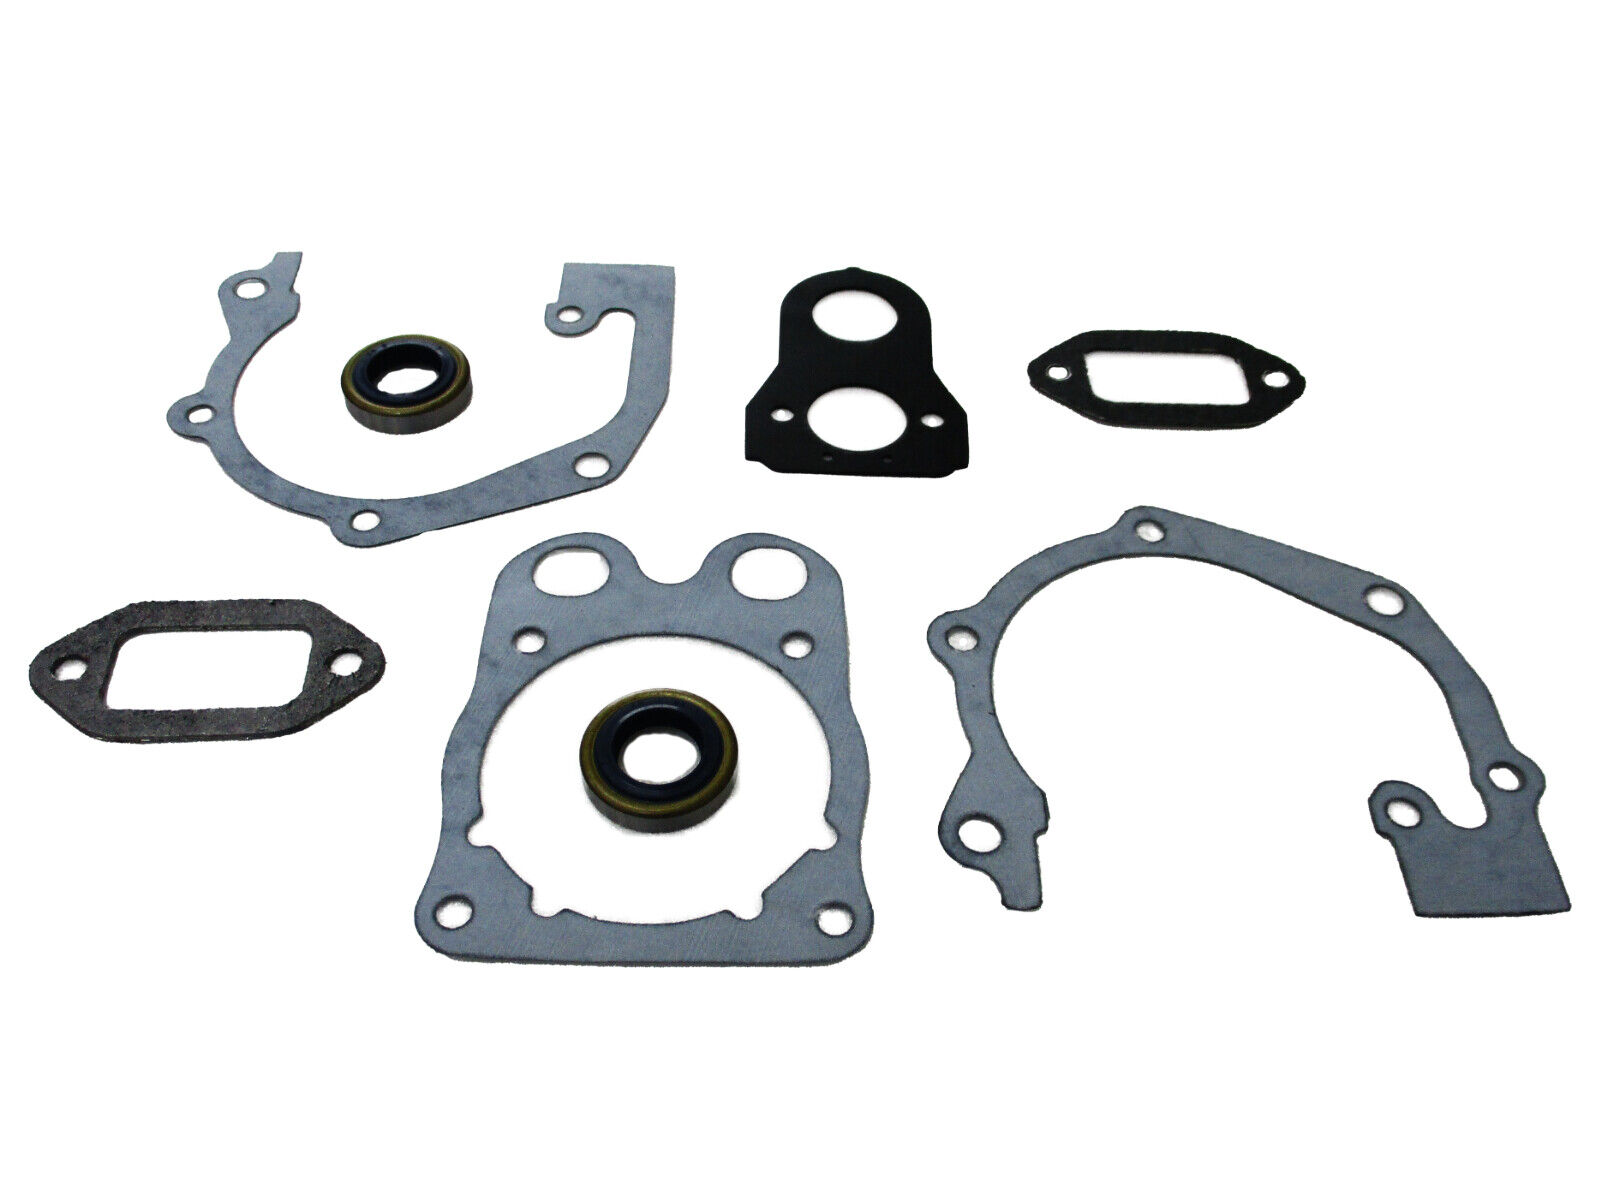 5063853-04 Fits Husqvarna K750 K760 Concrete Chainsaw Gasket Set with Oil Seal